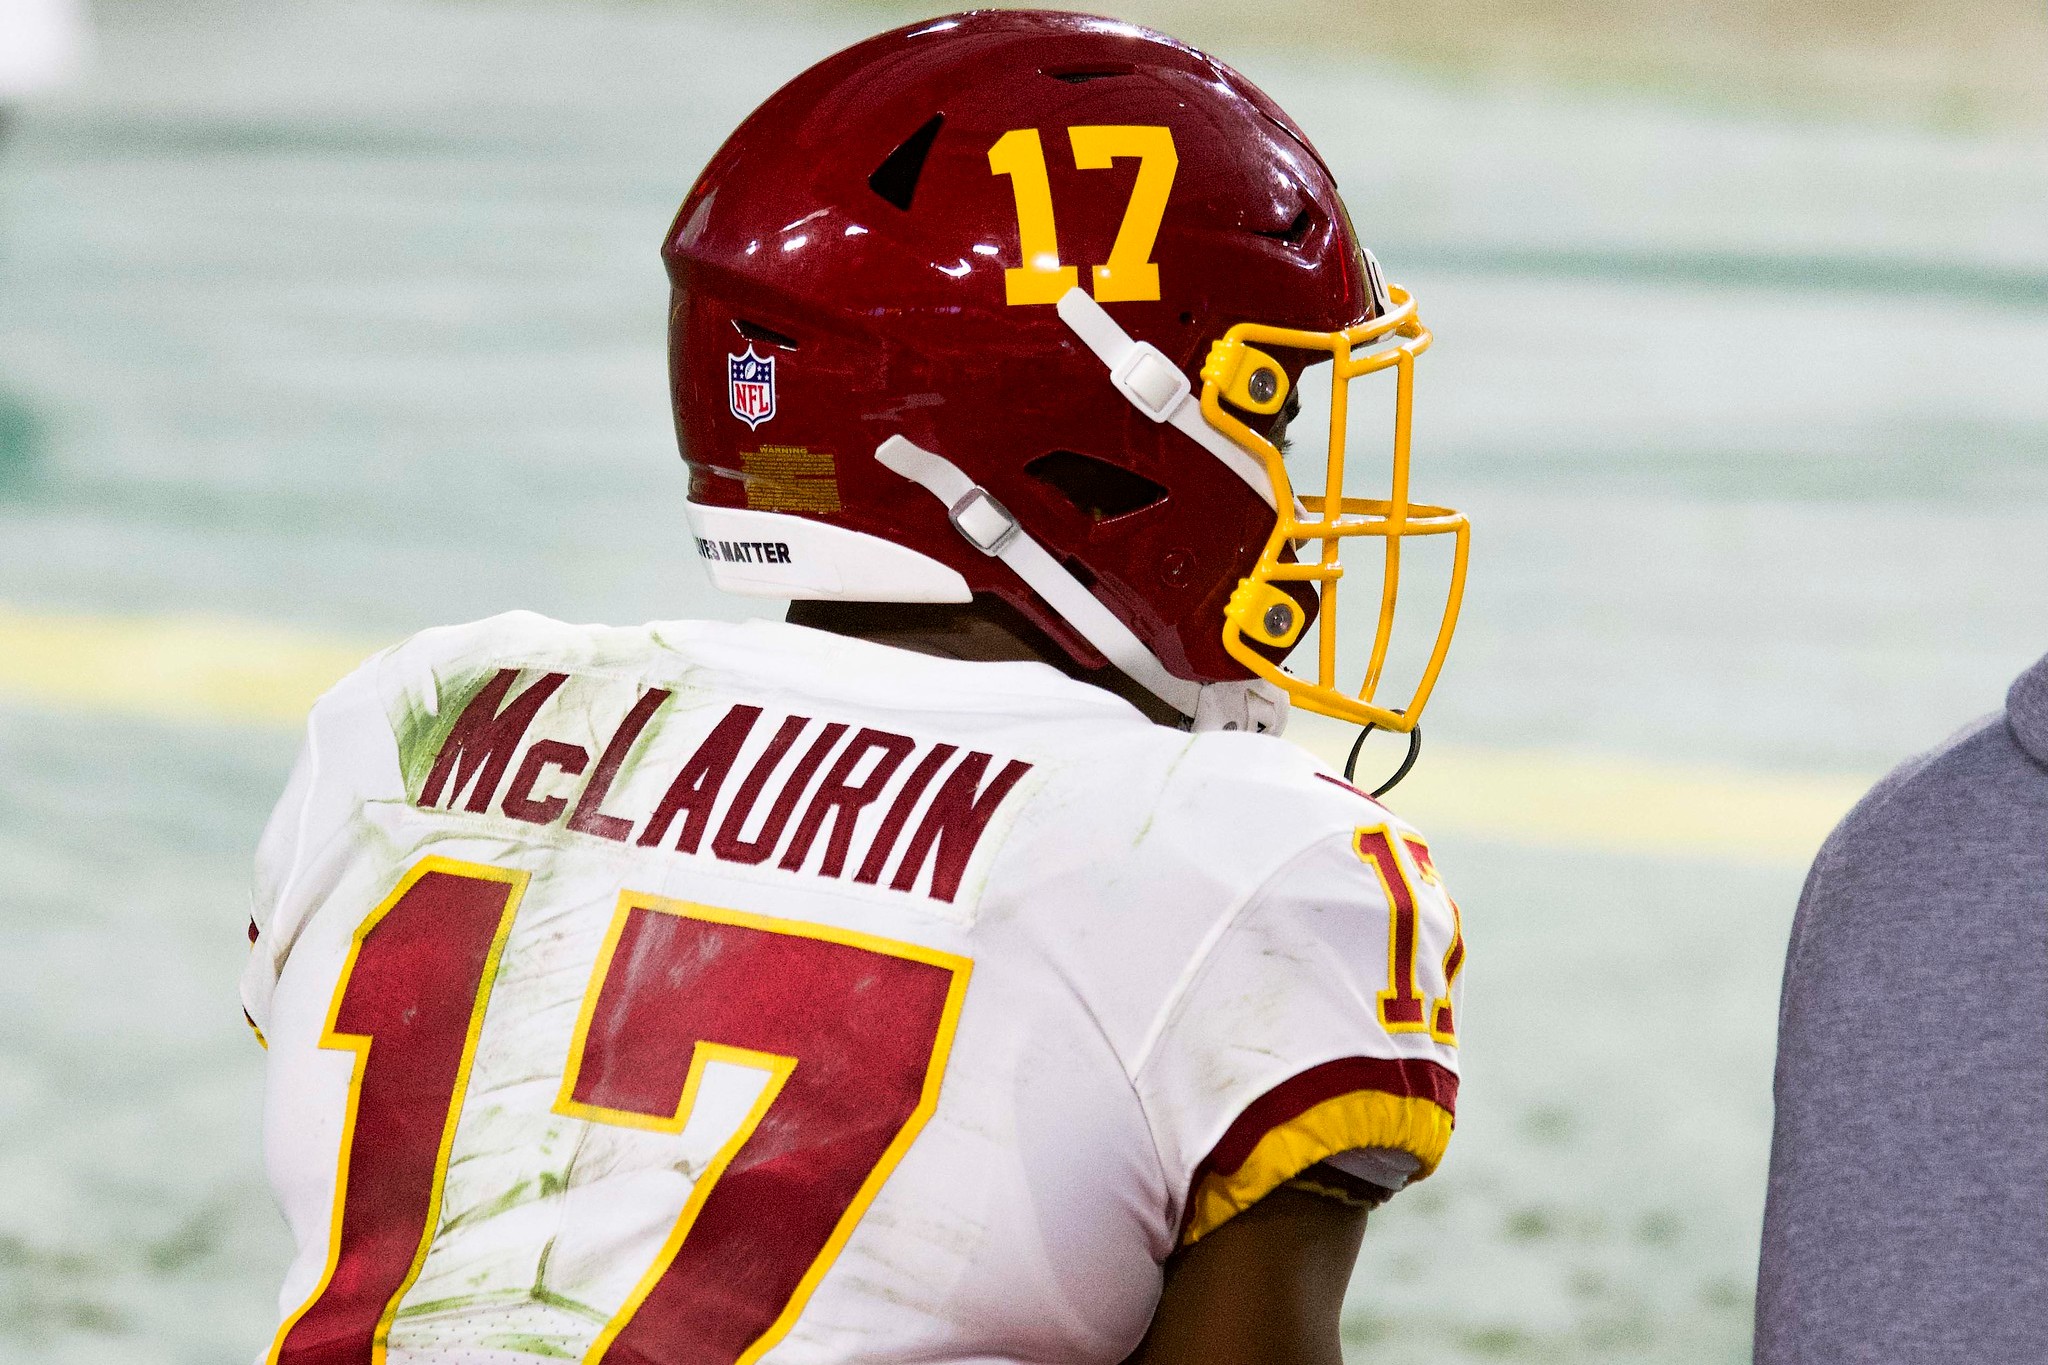 Terry McLaurin doubtful to play against Panthers with ankle injury DC